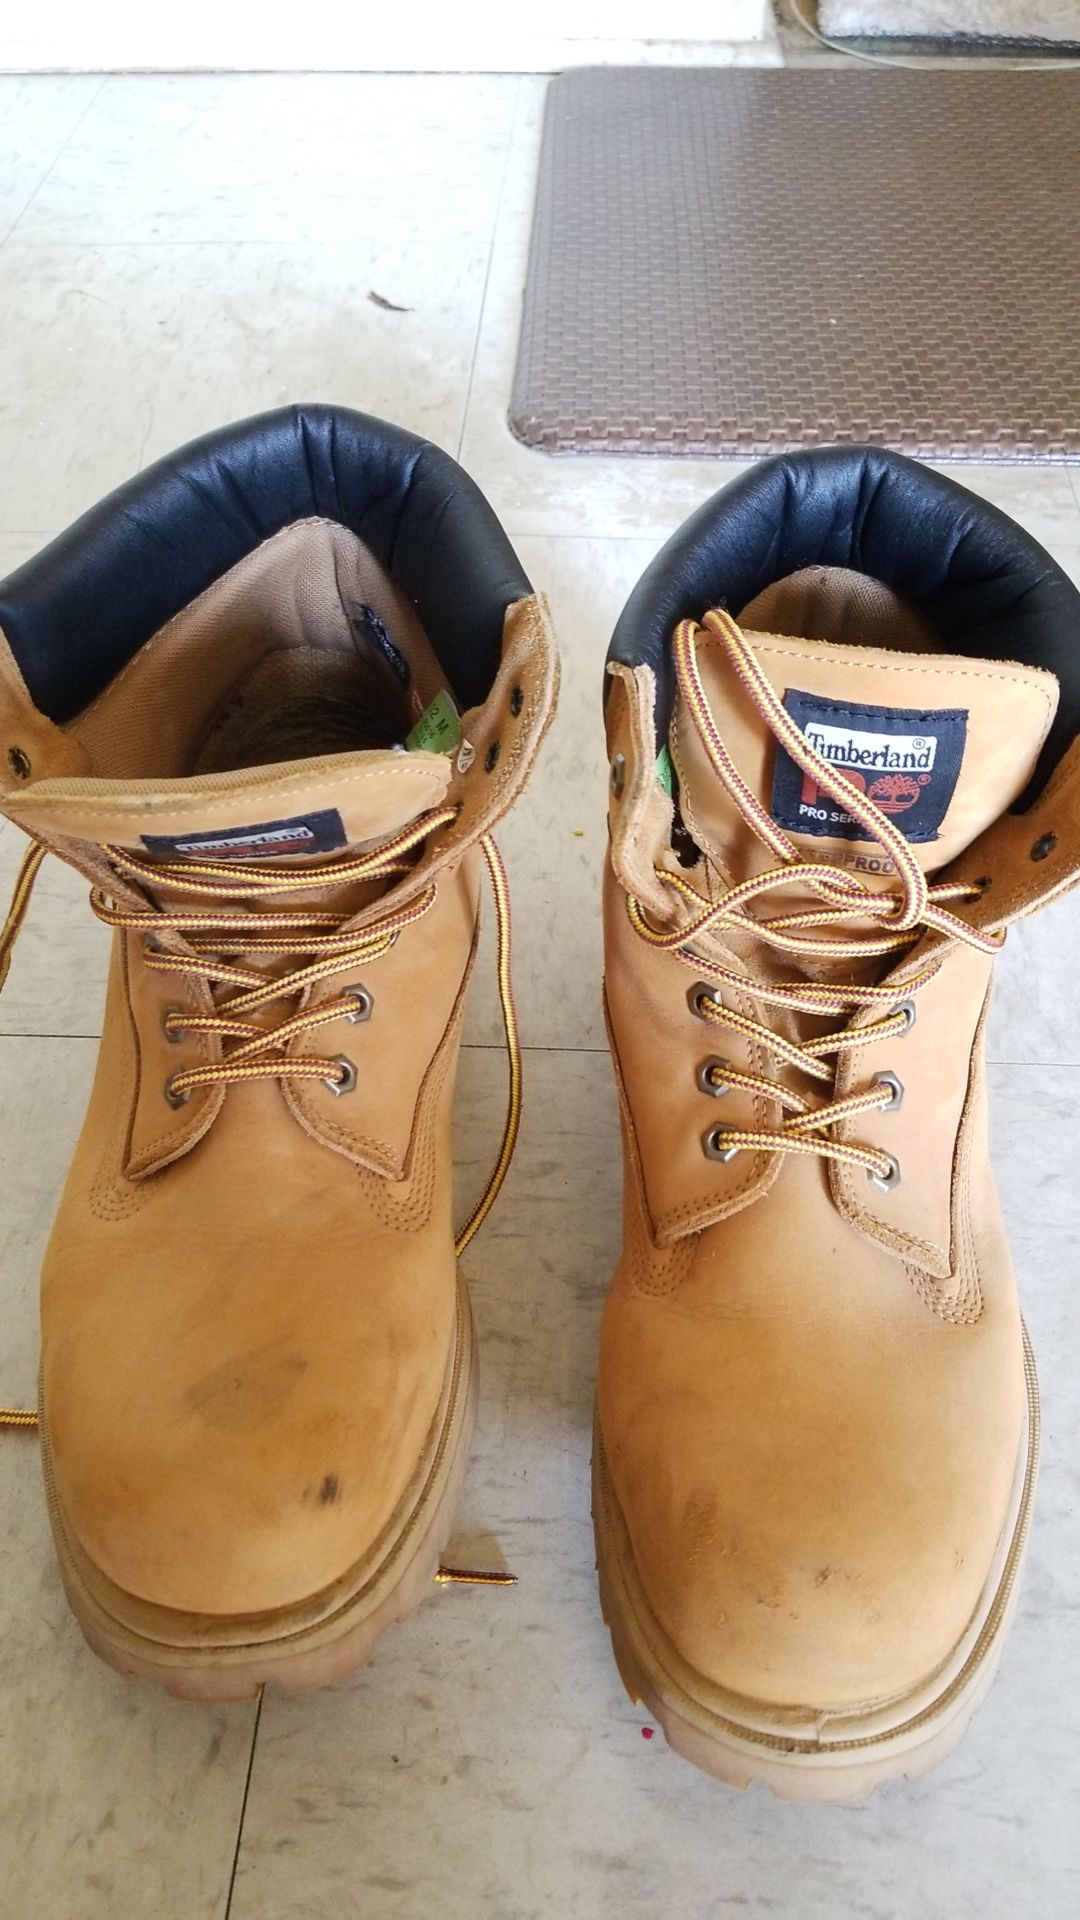 Timberland Steel Toe (PRO) Boot For Construction Site. Size 12